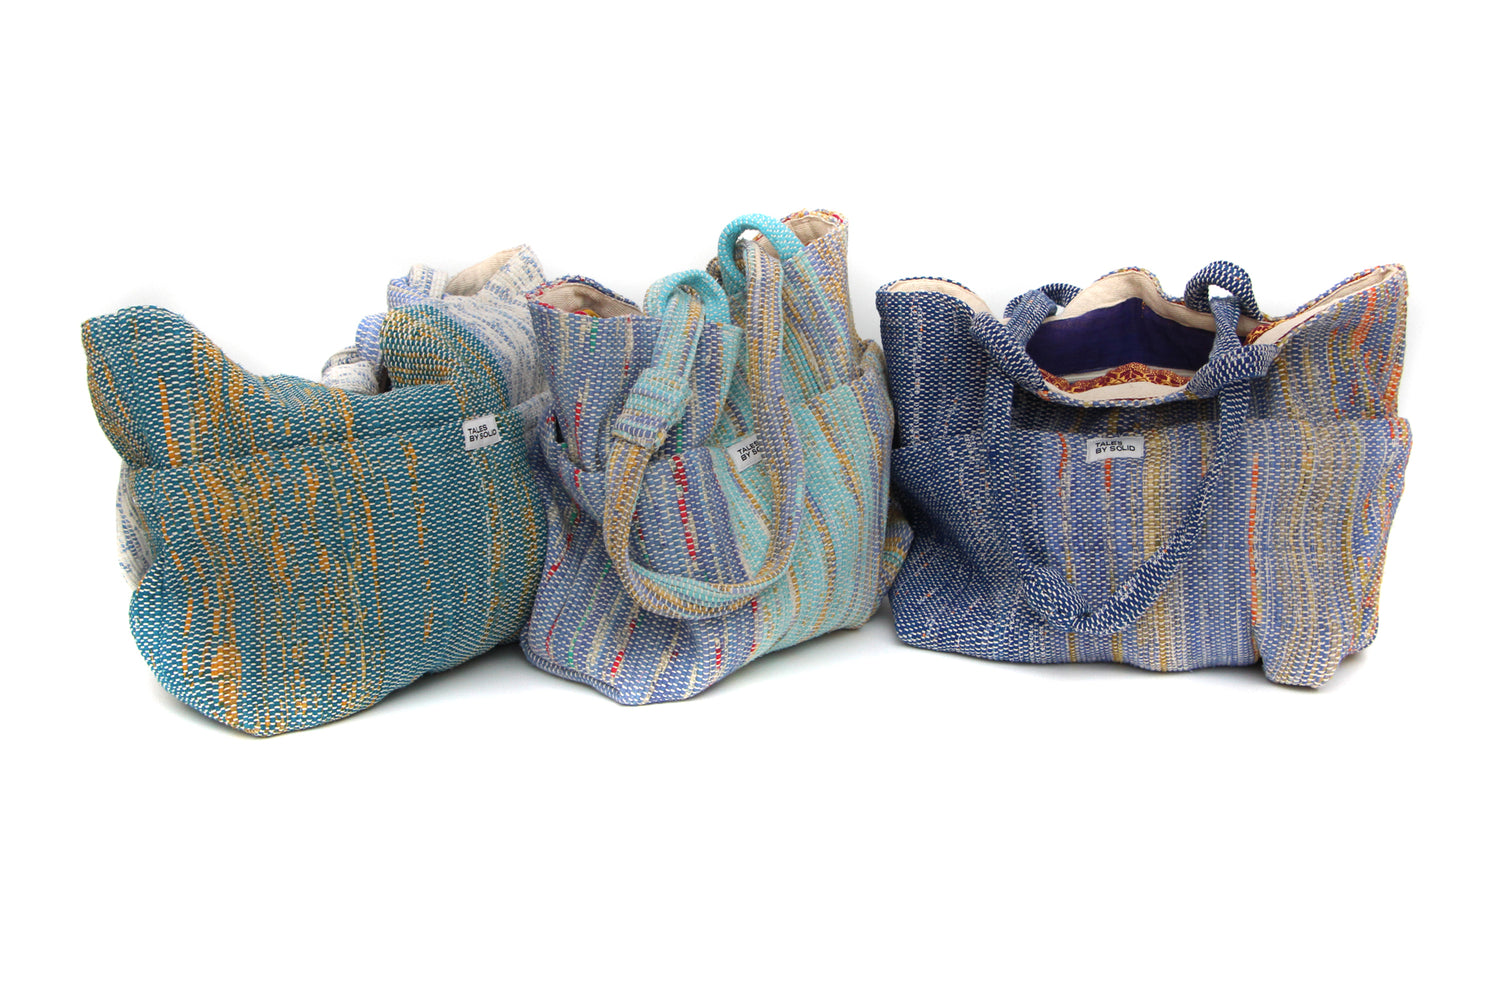 Small Sari Bag 08 - Handcrafted Elegance with a Sustainable Story